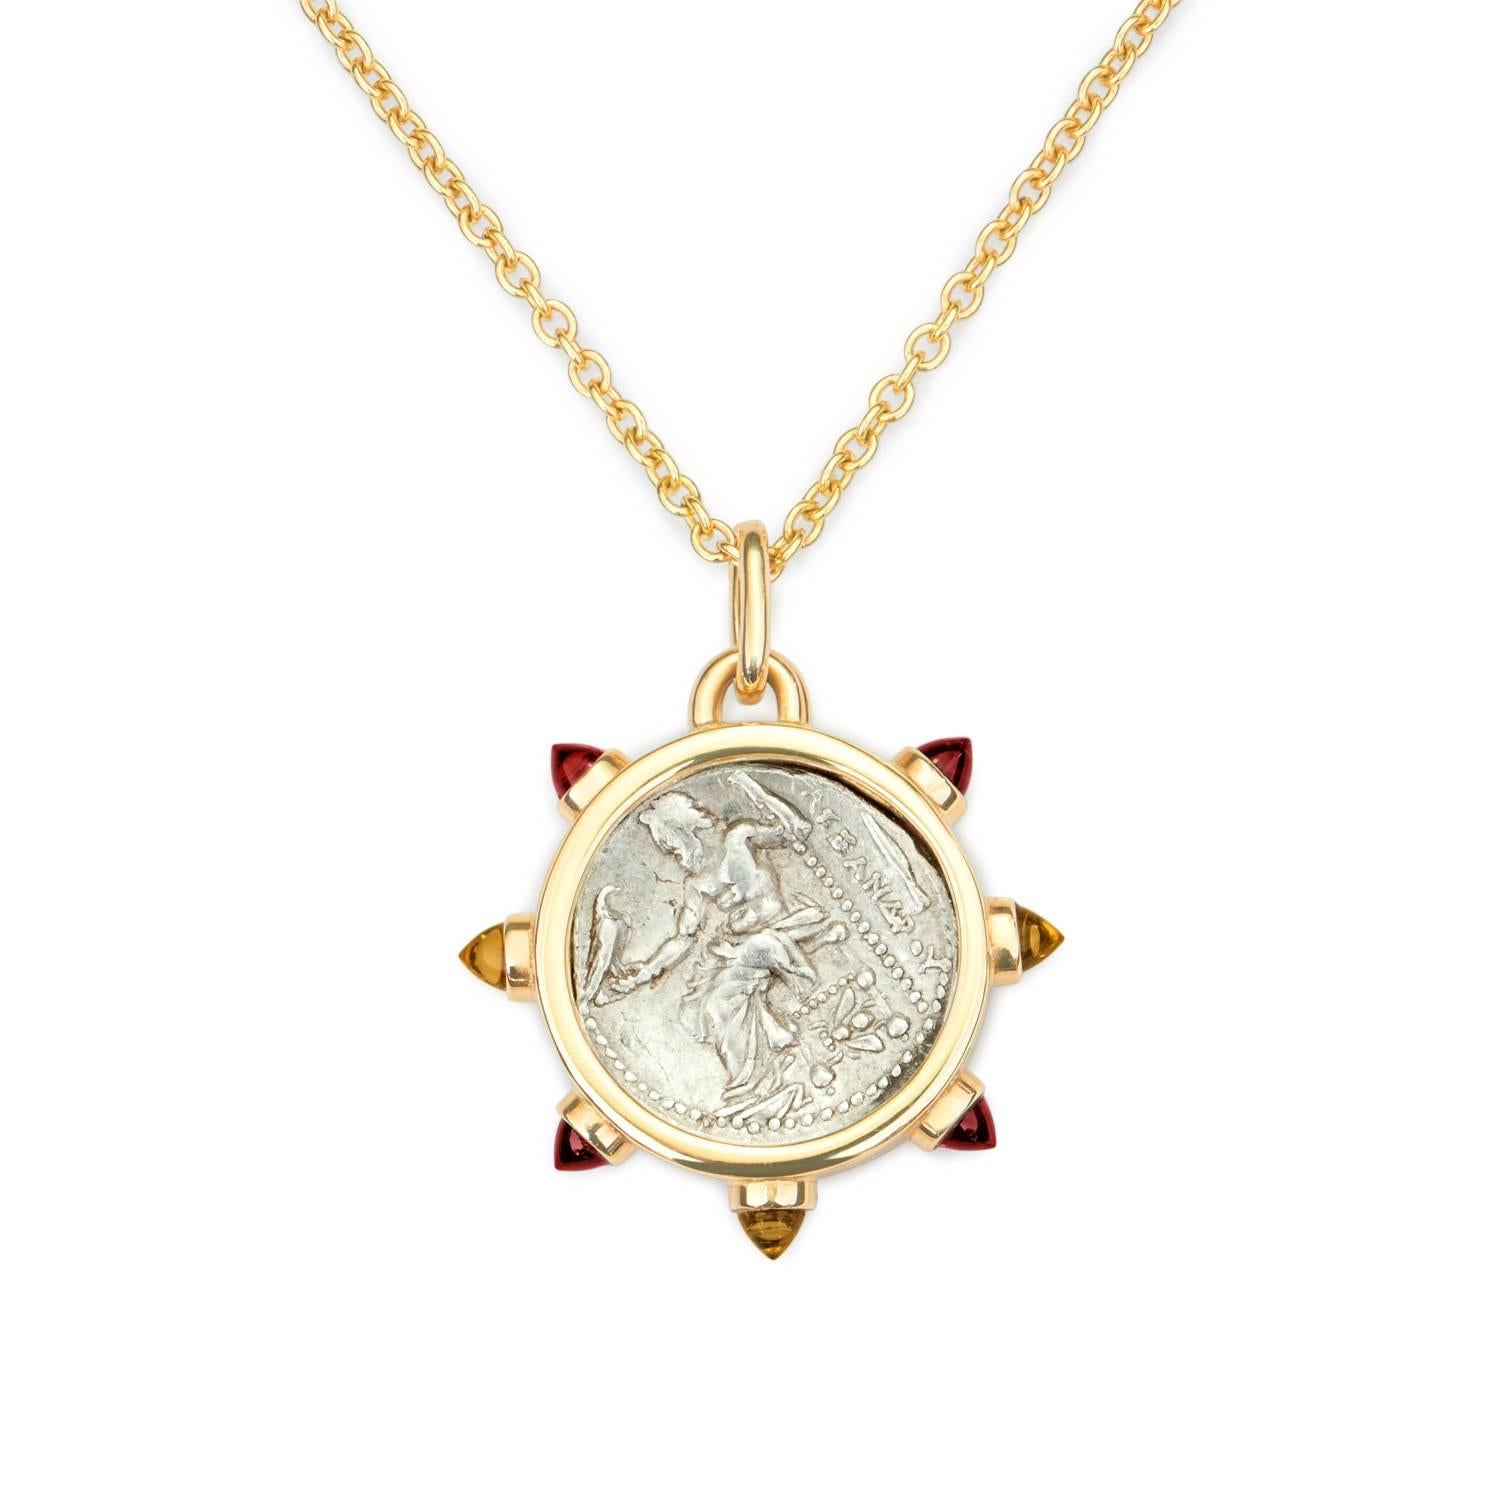 This DUBINI coin necklace from the 'Empires' collection features an authentic coin from 336-323 B.C. set in 18K yellow gold with garnet and citrine bullet cabochons.

Depicted on the coin: Alexander with a bust of Heracles, on the obverse and a